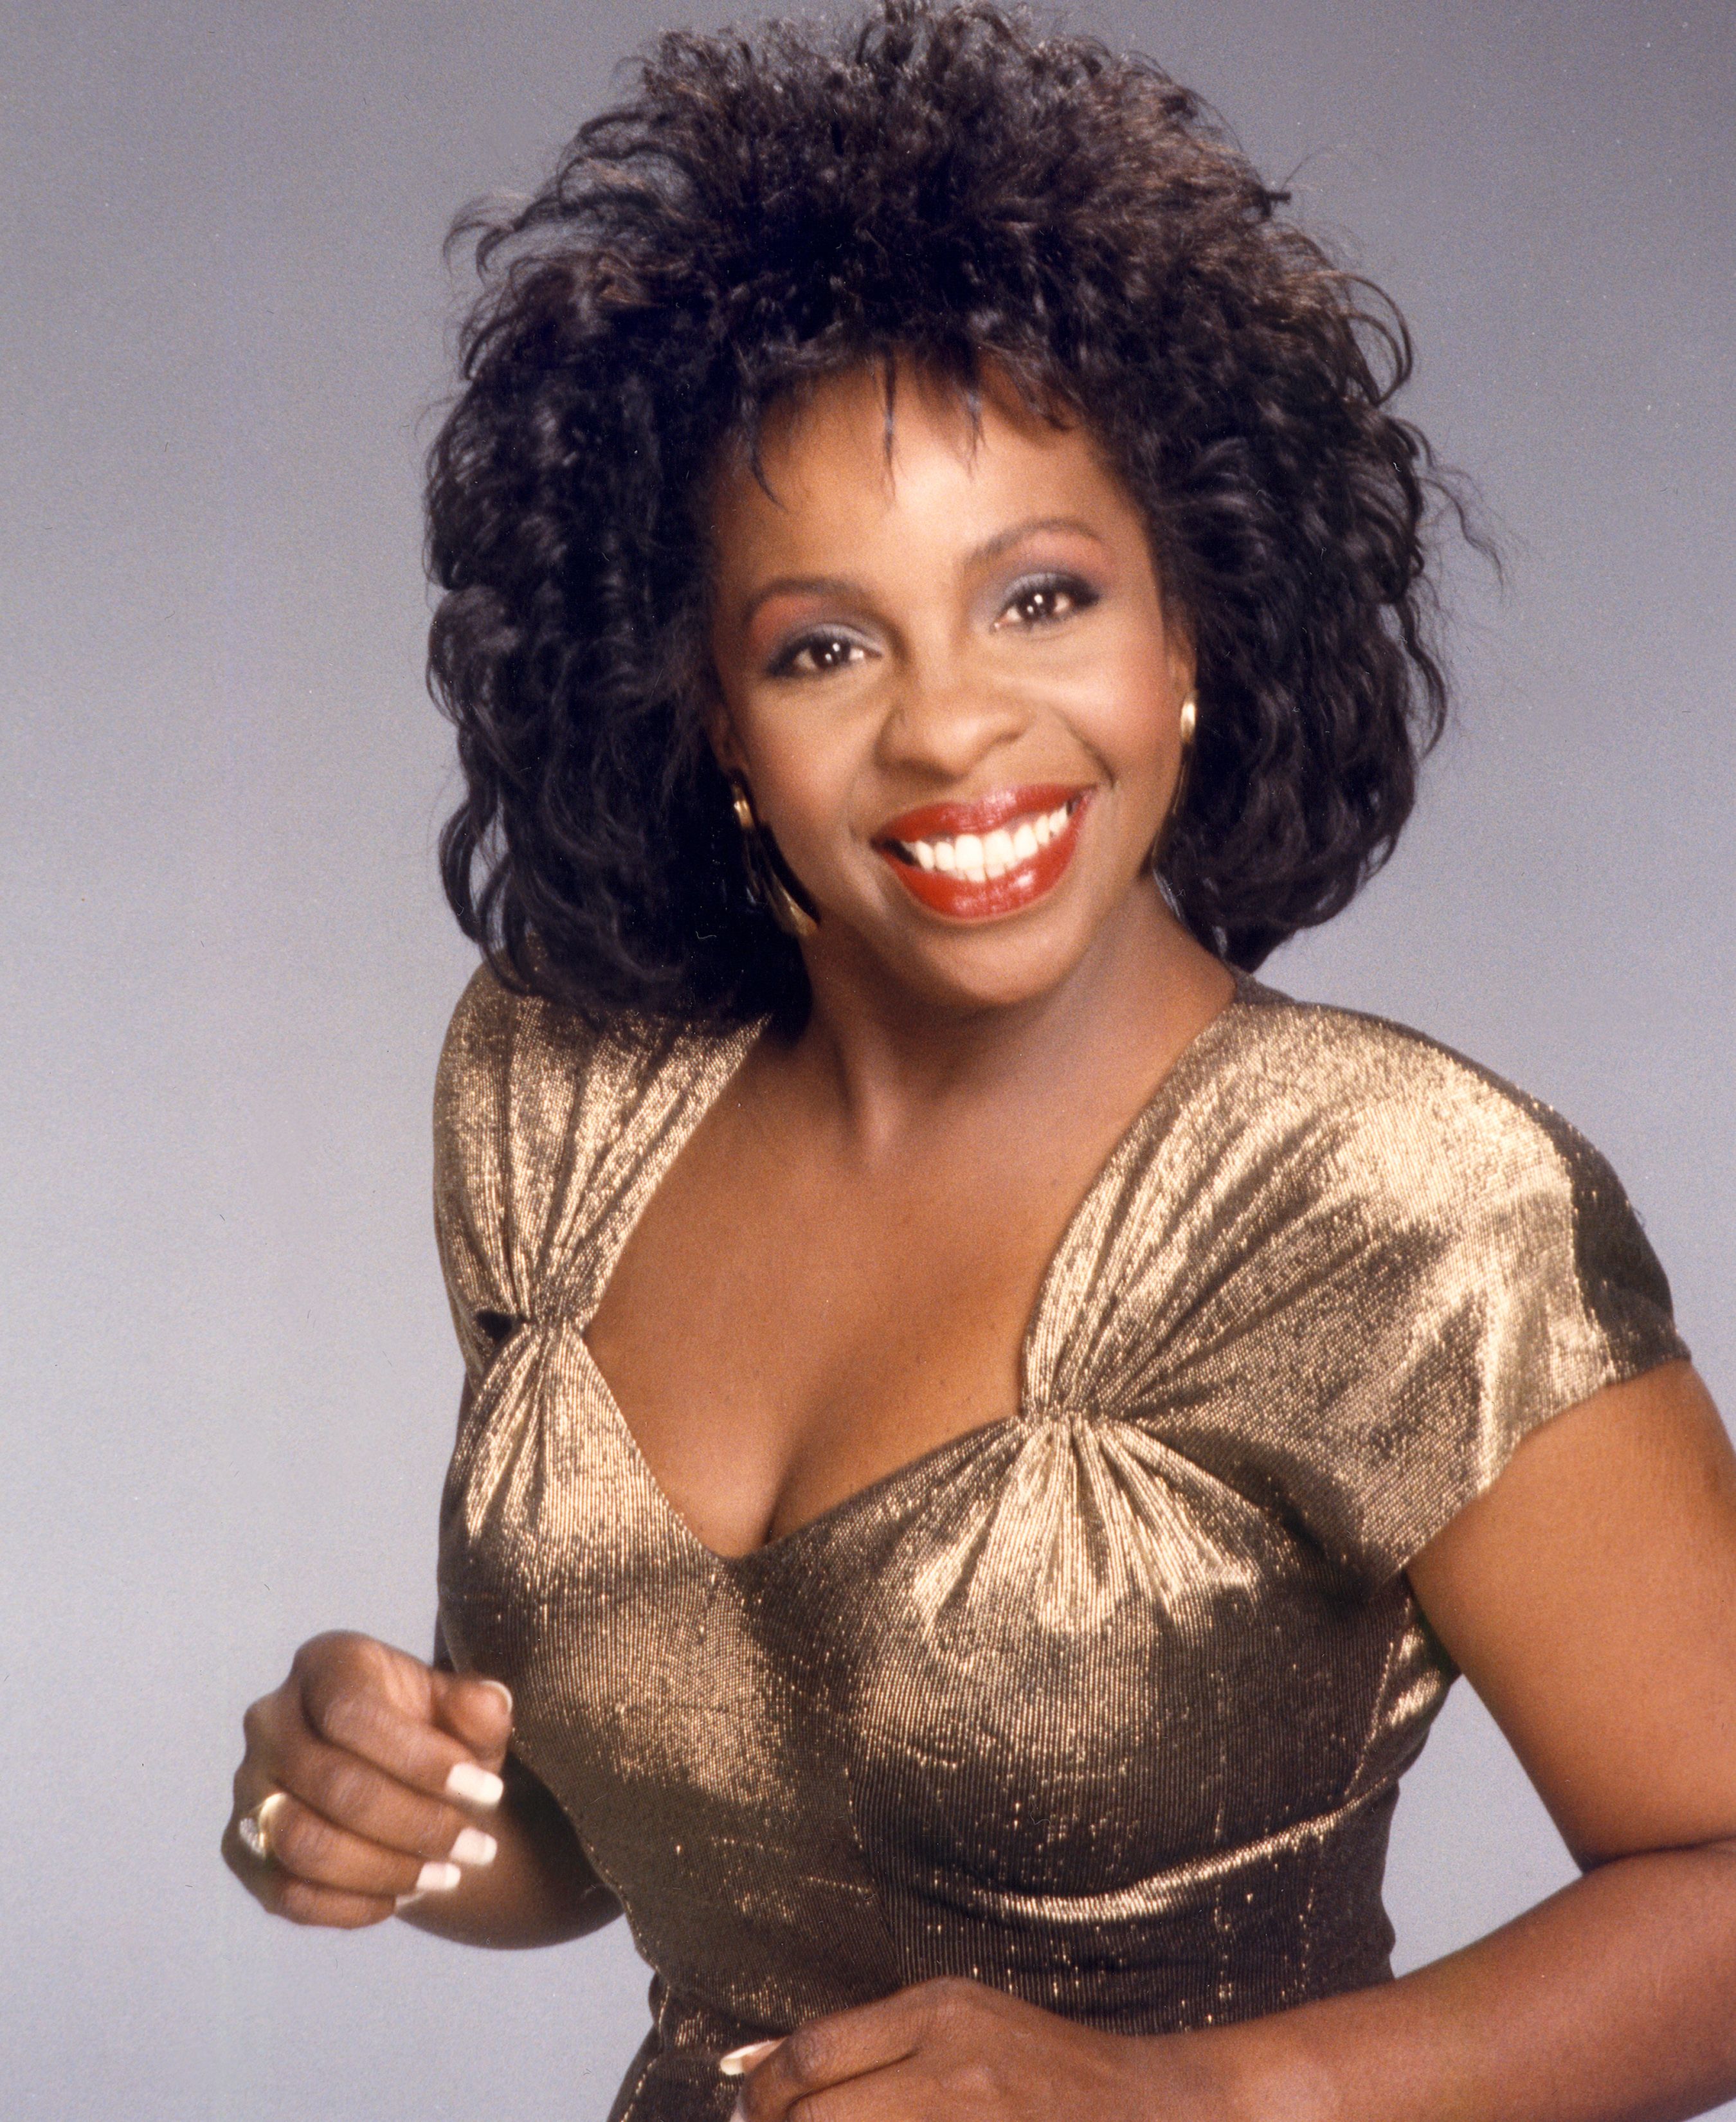 where does gladys knight live